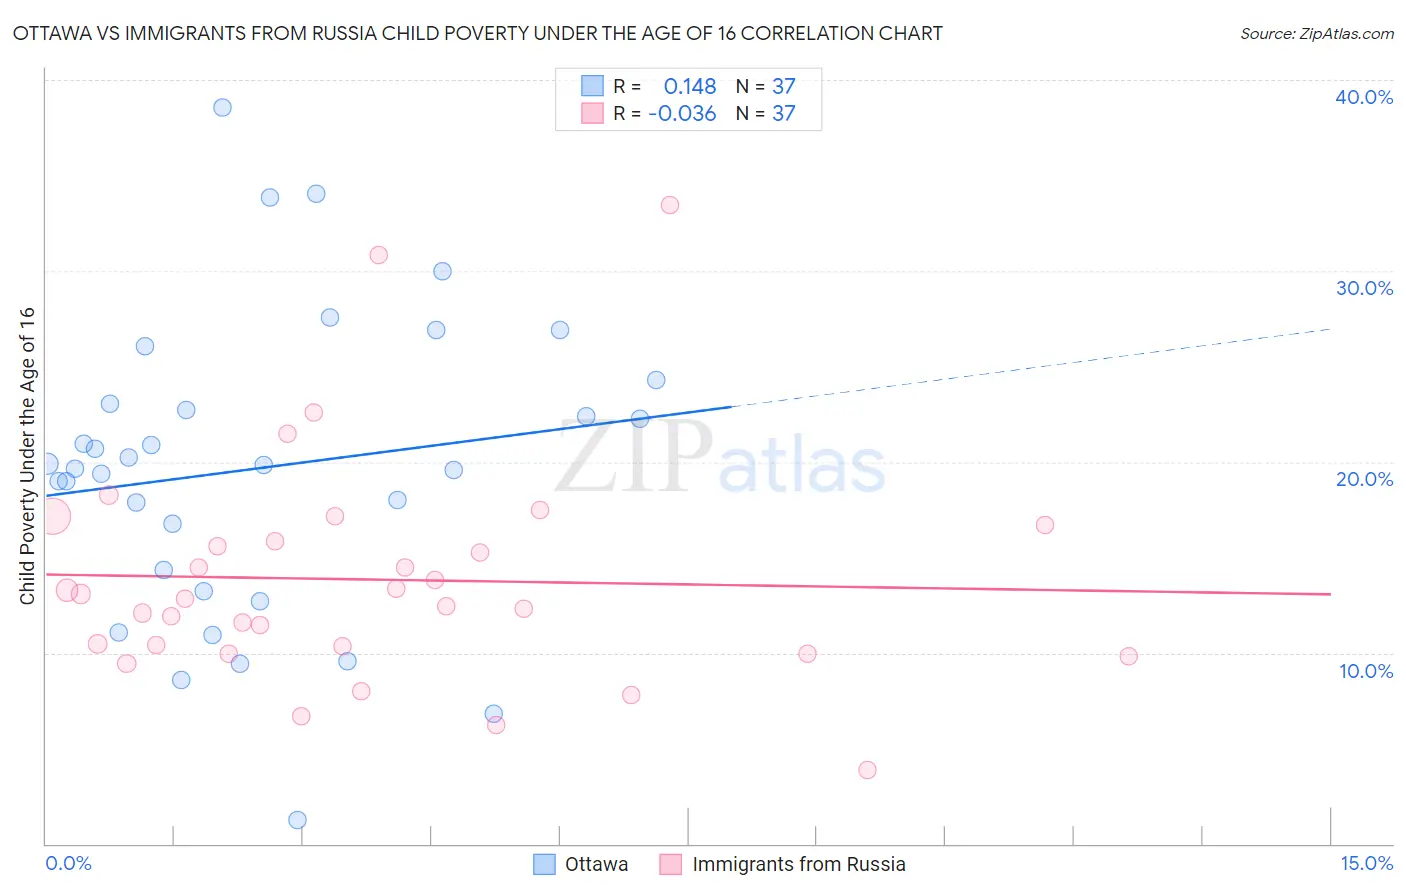 Ottawa vs Immigrants from Russia Child Poverty Under the Age of 16